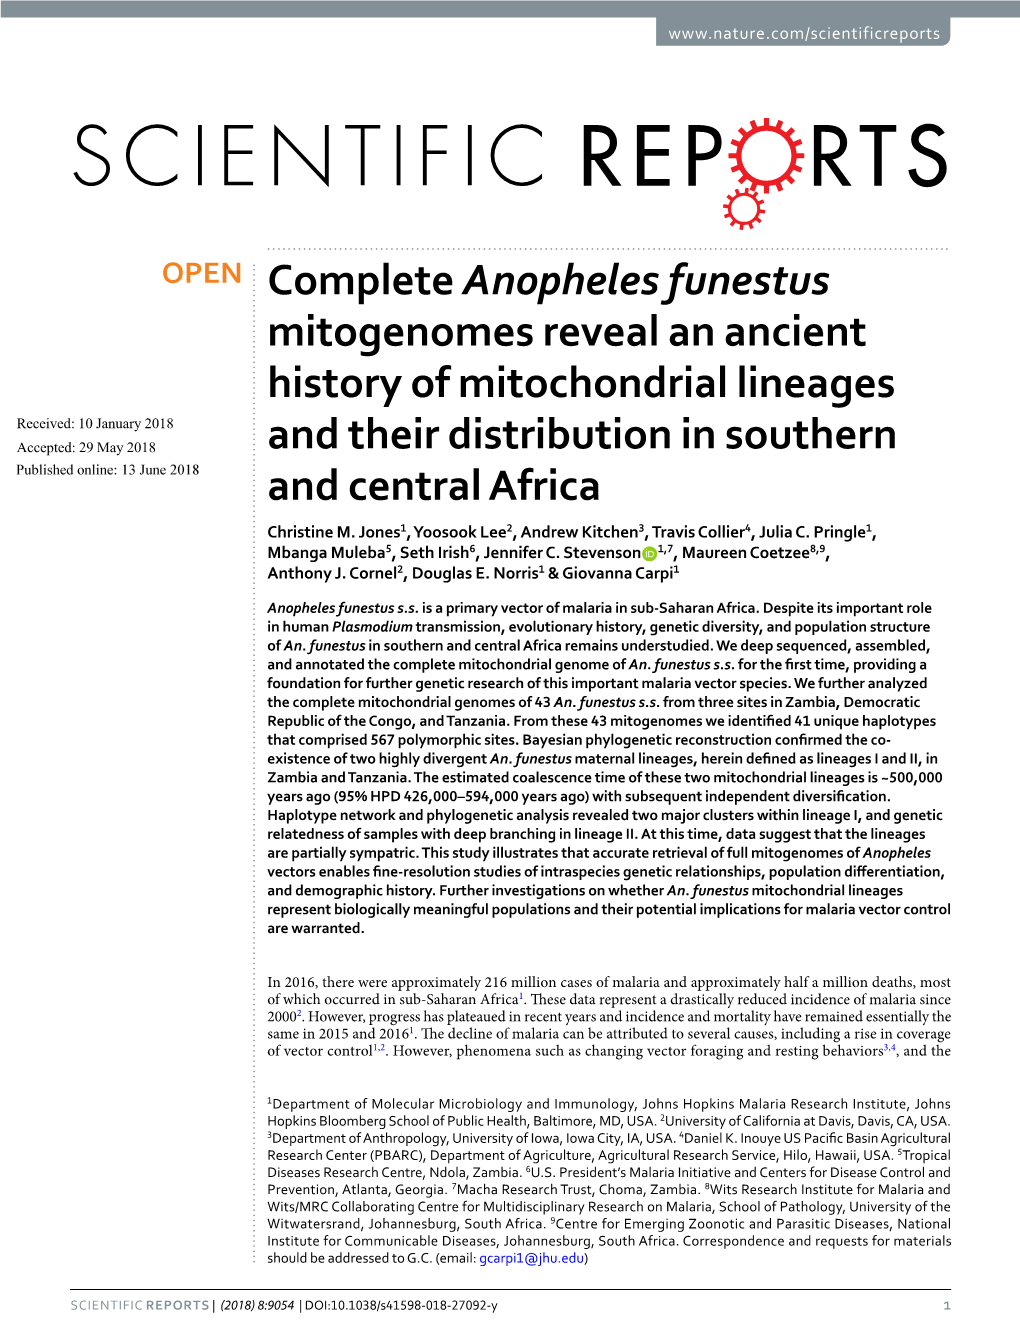 Complete Anopheles Funestus Mitogenomes Reveal an Ancient